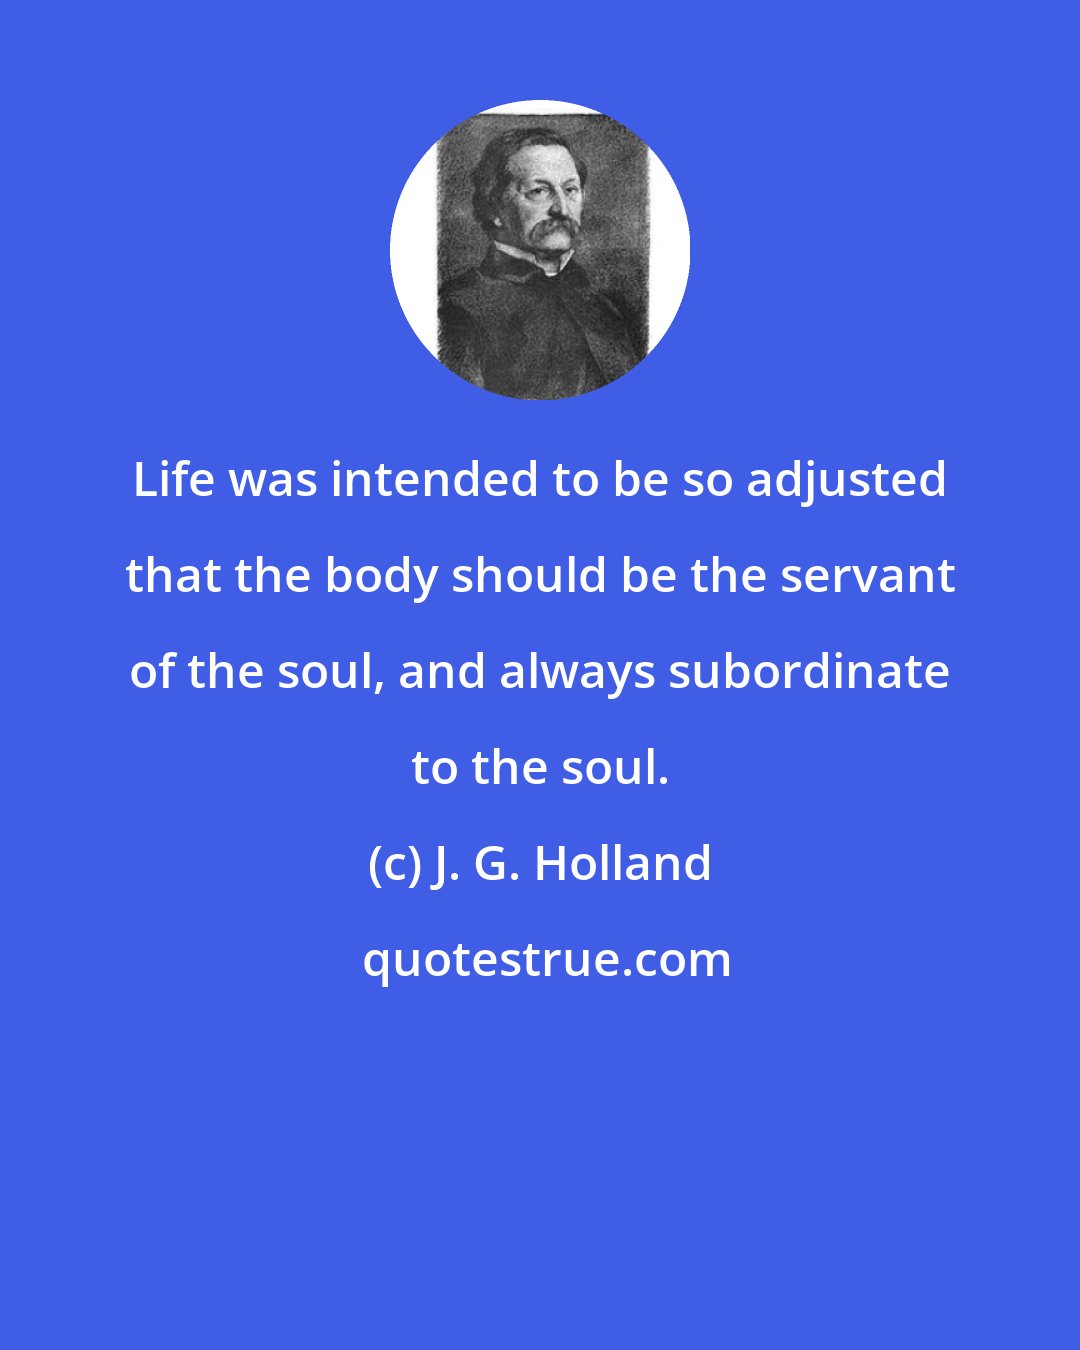 J. G. Holland: Life was intended to be so adjusted that the body should be the servant of the soul, and always subordinate to the soul.